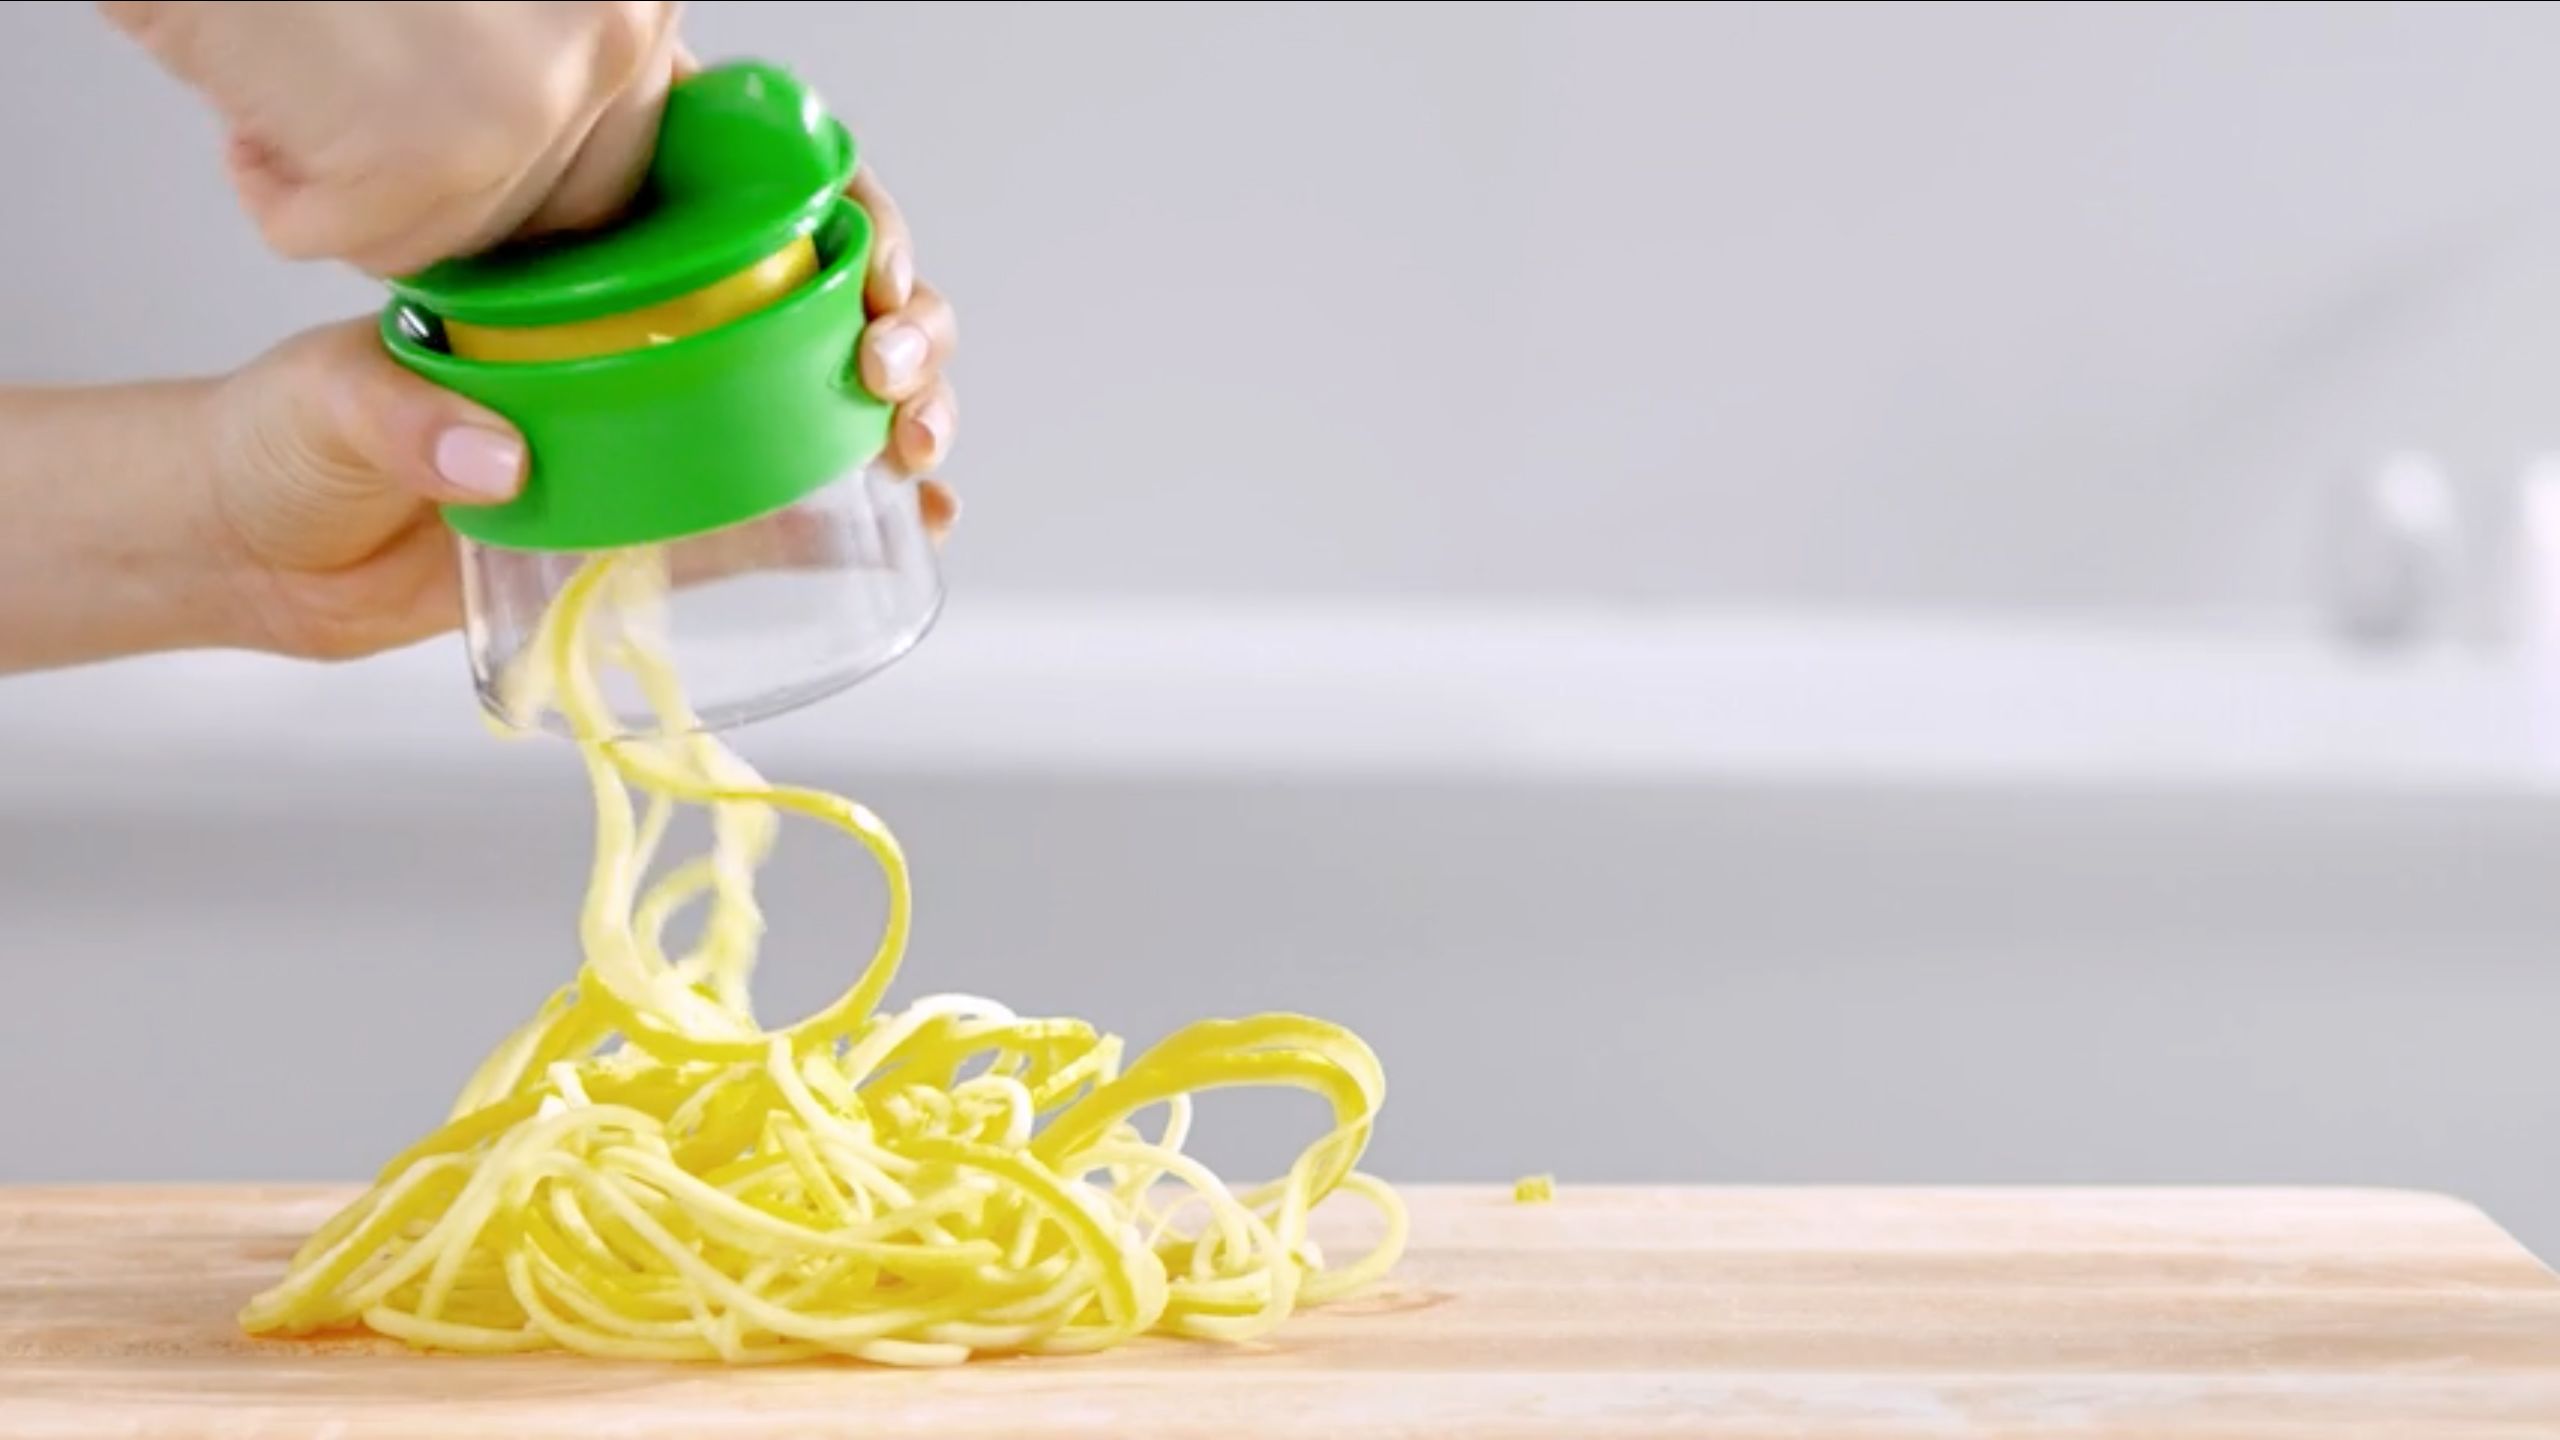 OXO Hand-Held Vegetable Spiralizer + Reviews